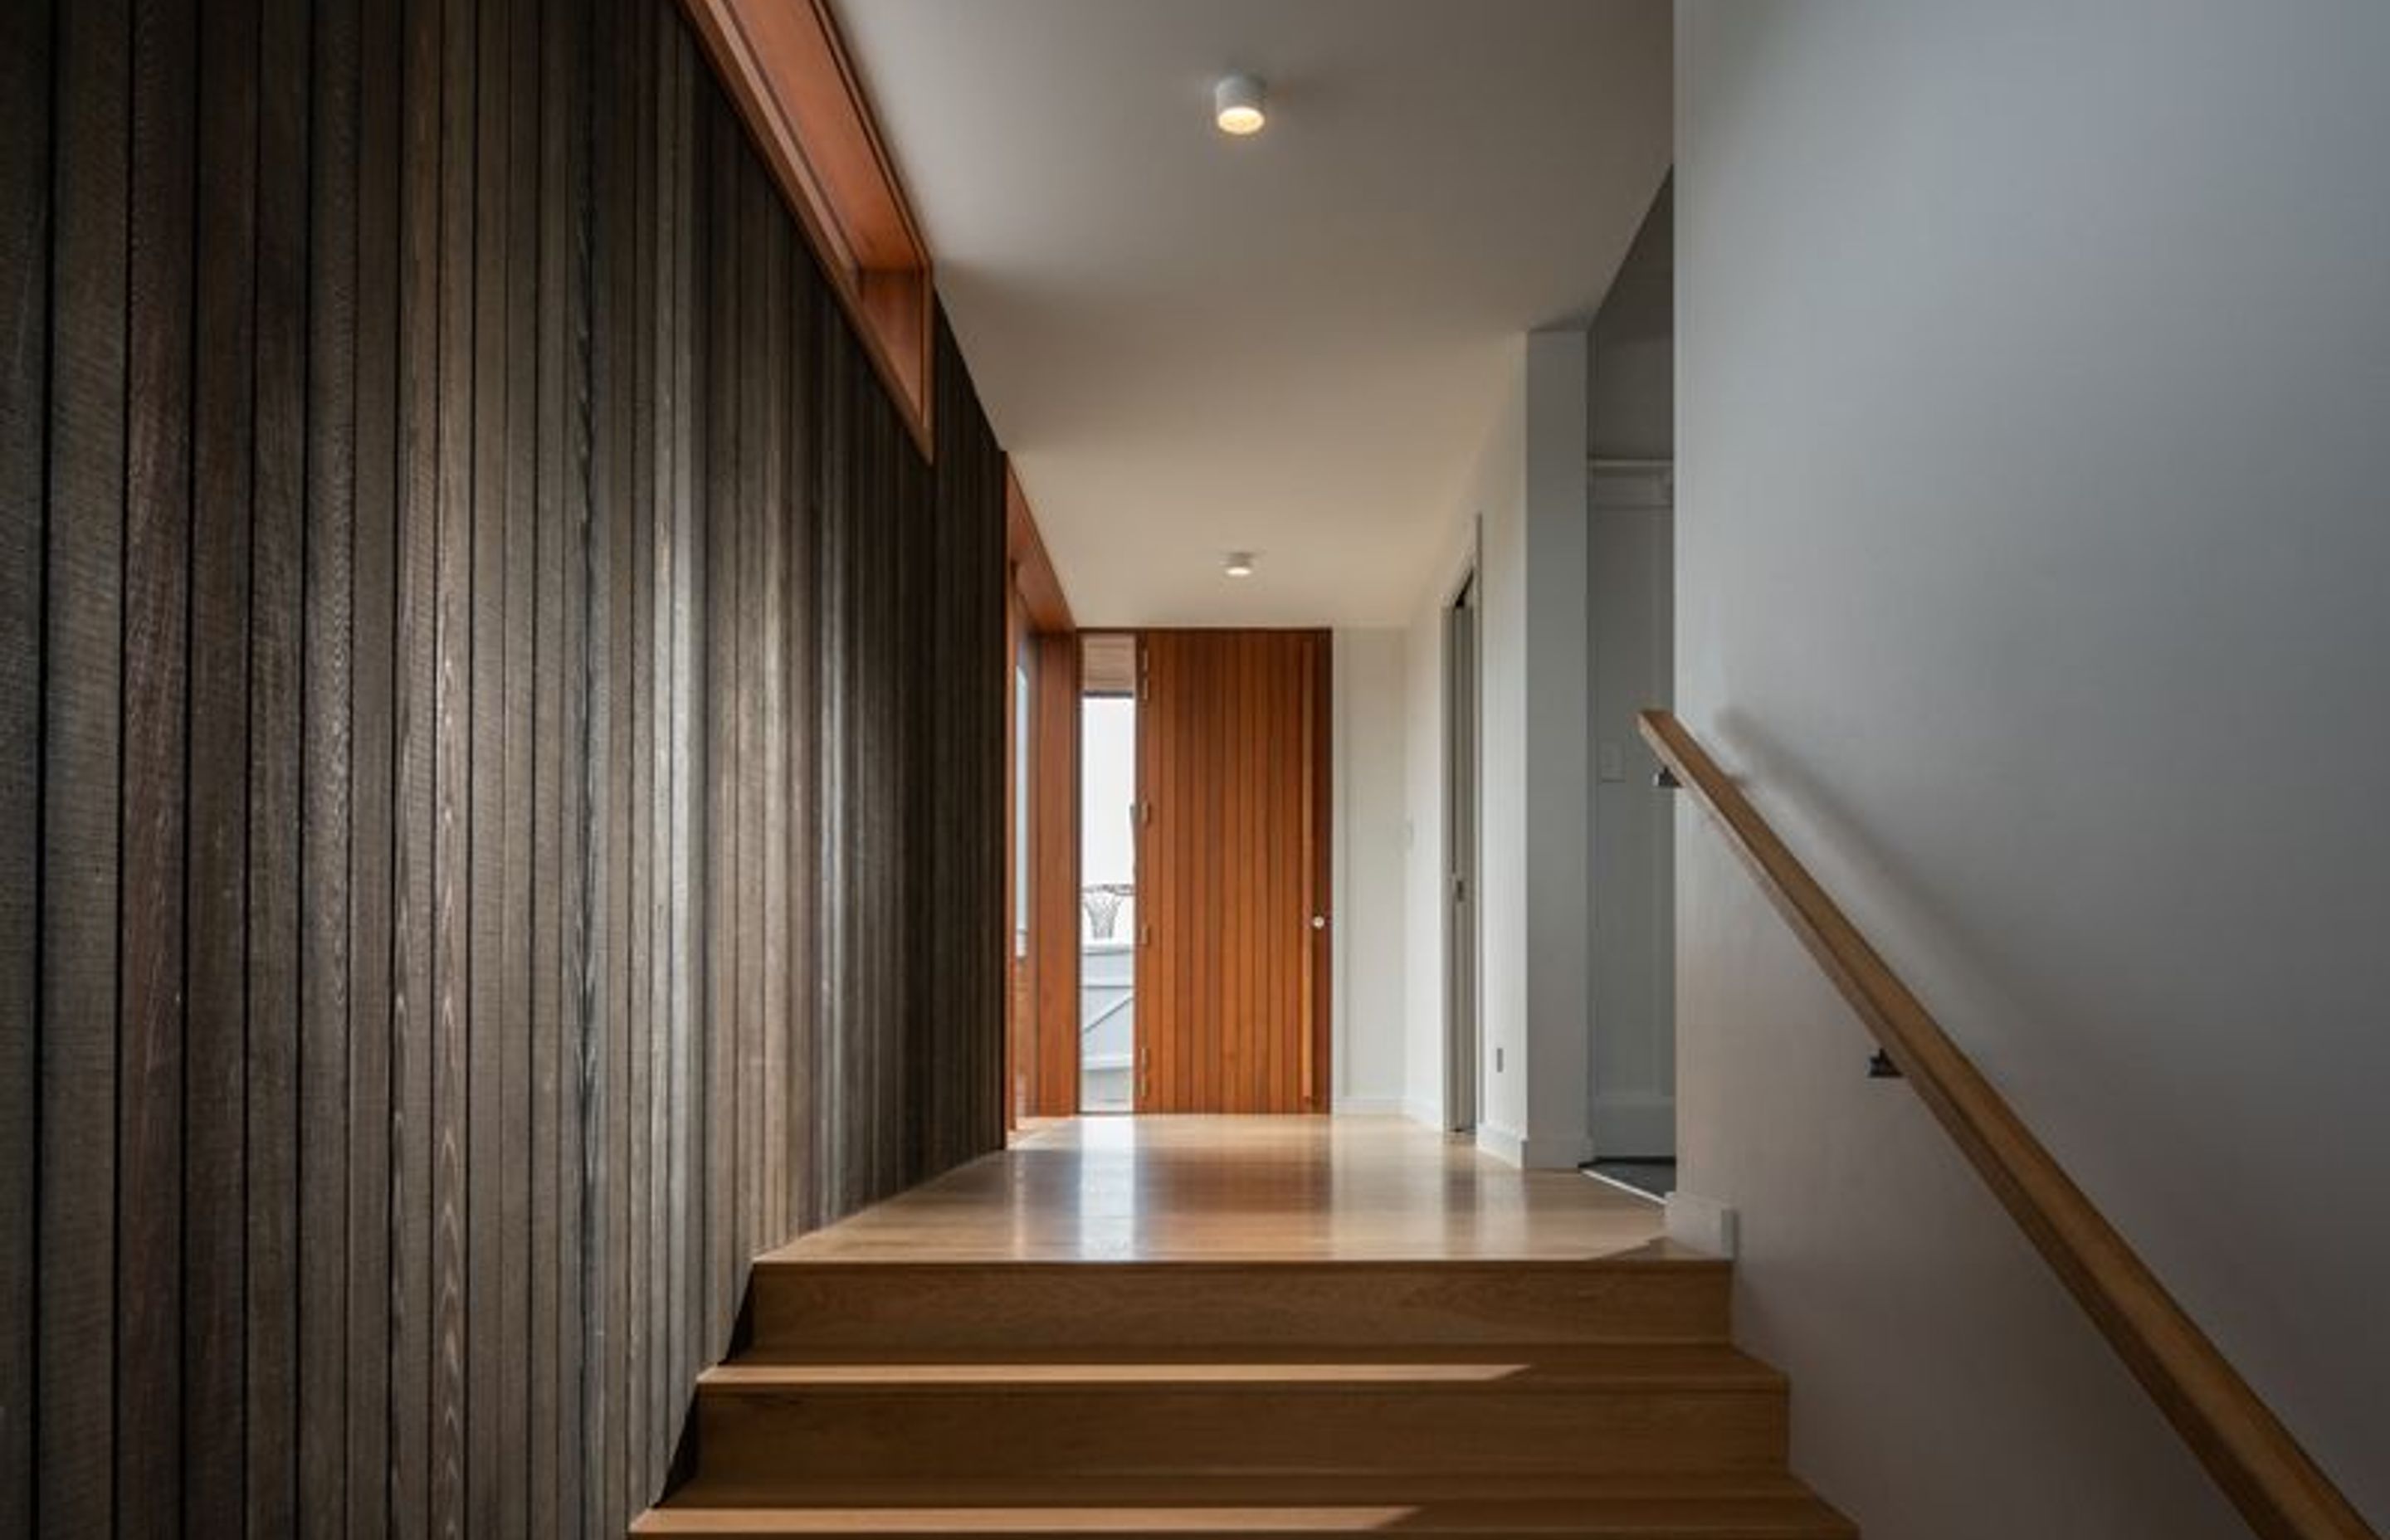 The entrance gallery features dark-stained vertical cedar wall panelling that creates a synergy with the exterior cladding. 